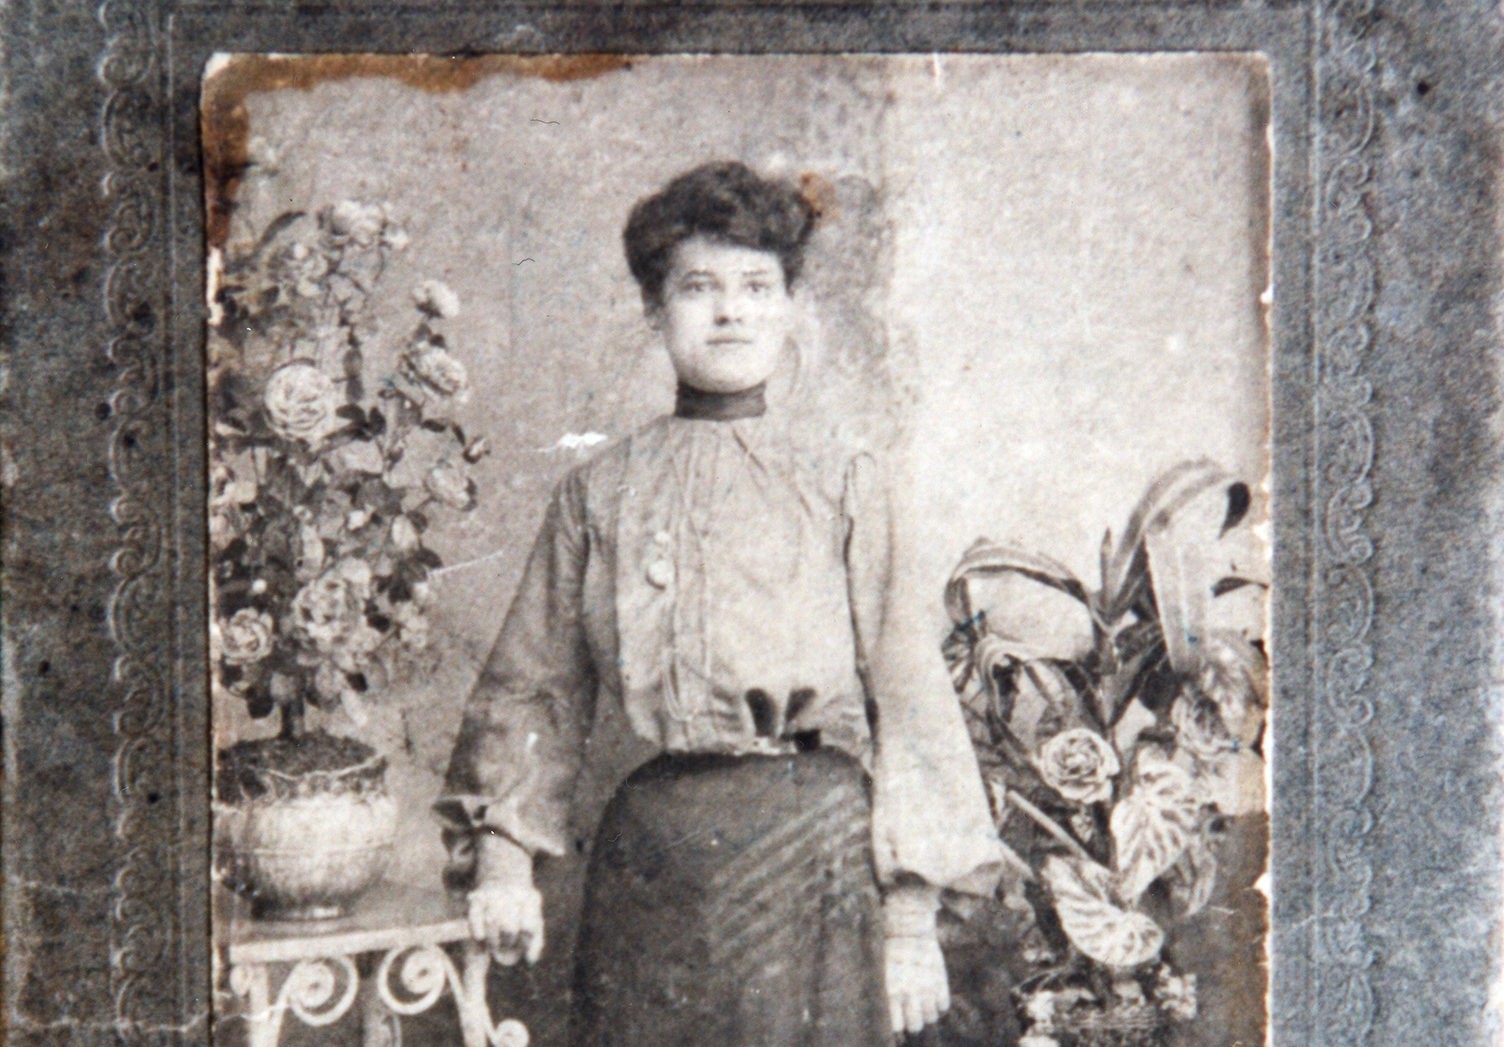 Former 97 Orchard Resident Sarah Burinescu, an adult woman with light-skin tone, in a long-sleeved dress and hair styled in an up-do posing beside a flower vase